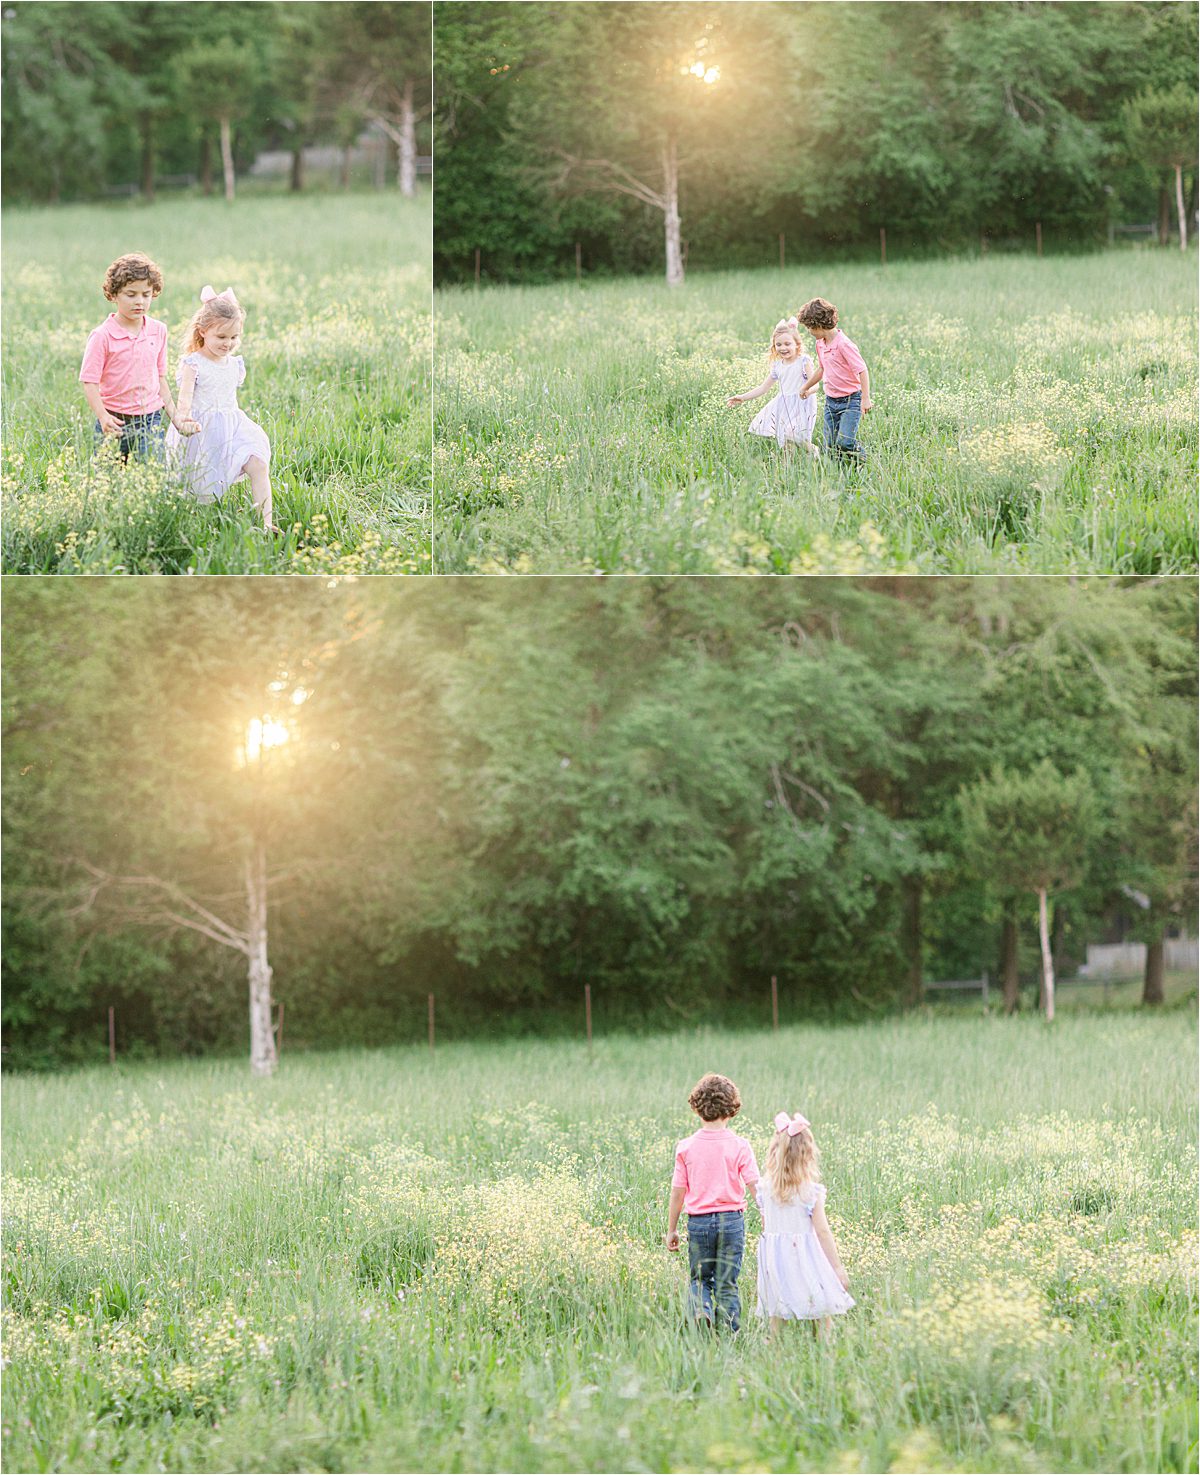 Athens, GA spring family pictures of a sibling walking in a field with wildflowers.